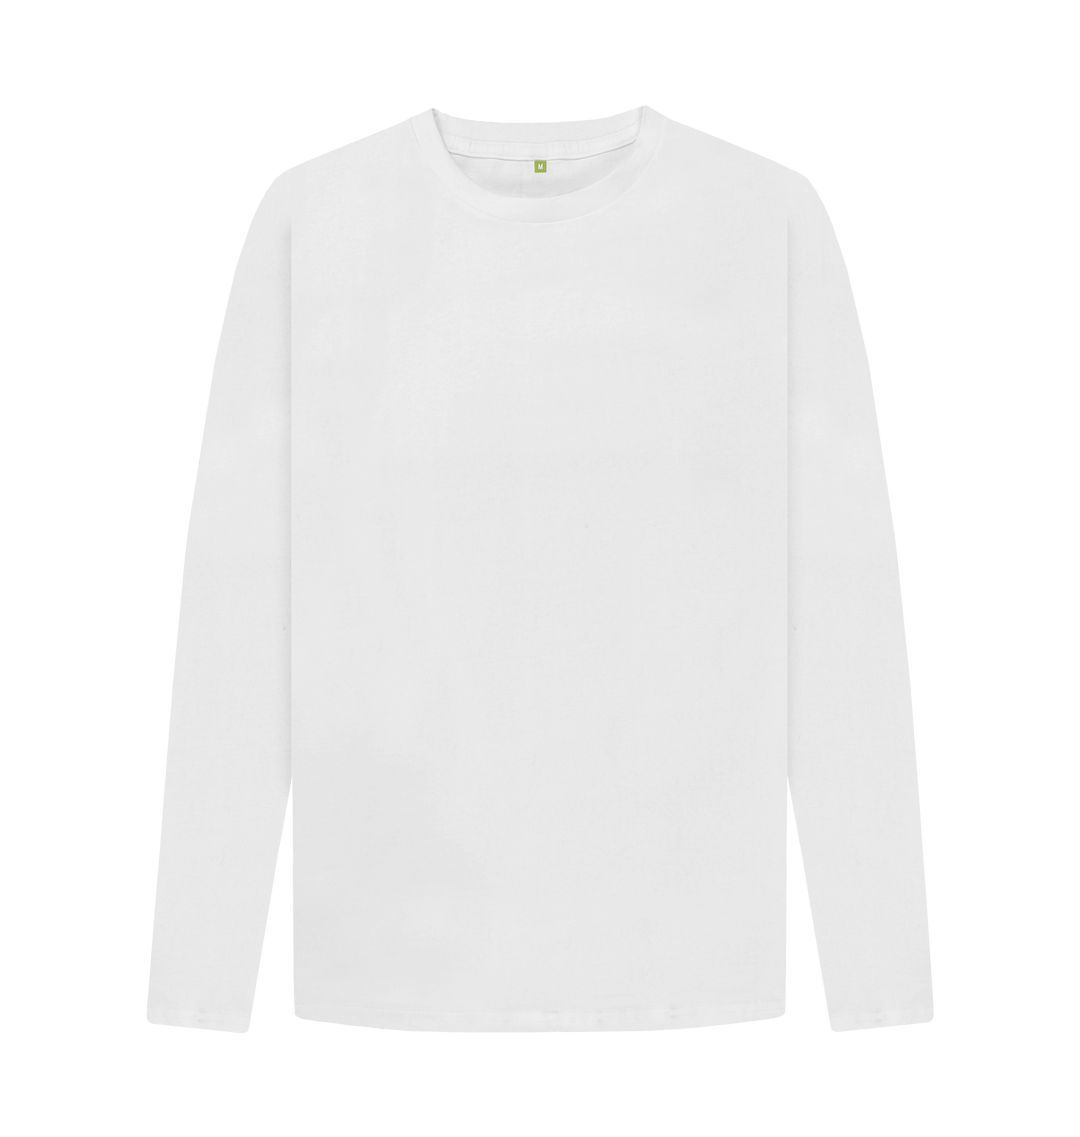 White Find Your Wave I Long Sleeve Tshirt